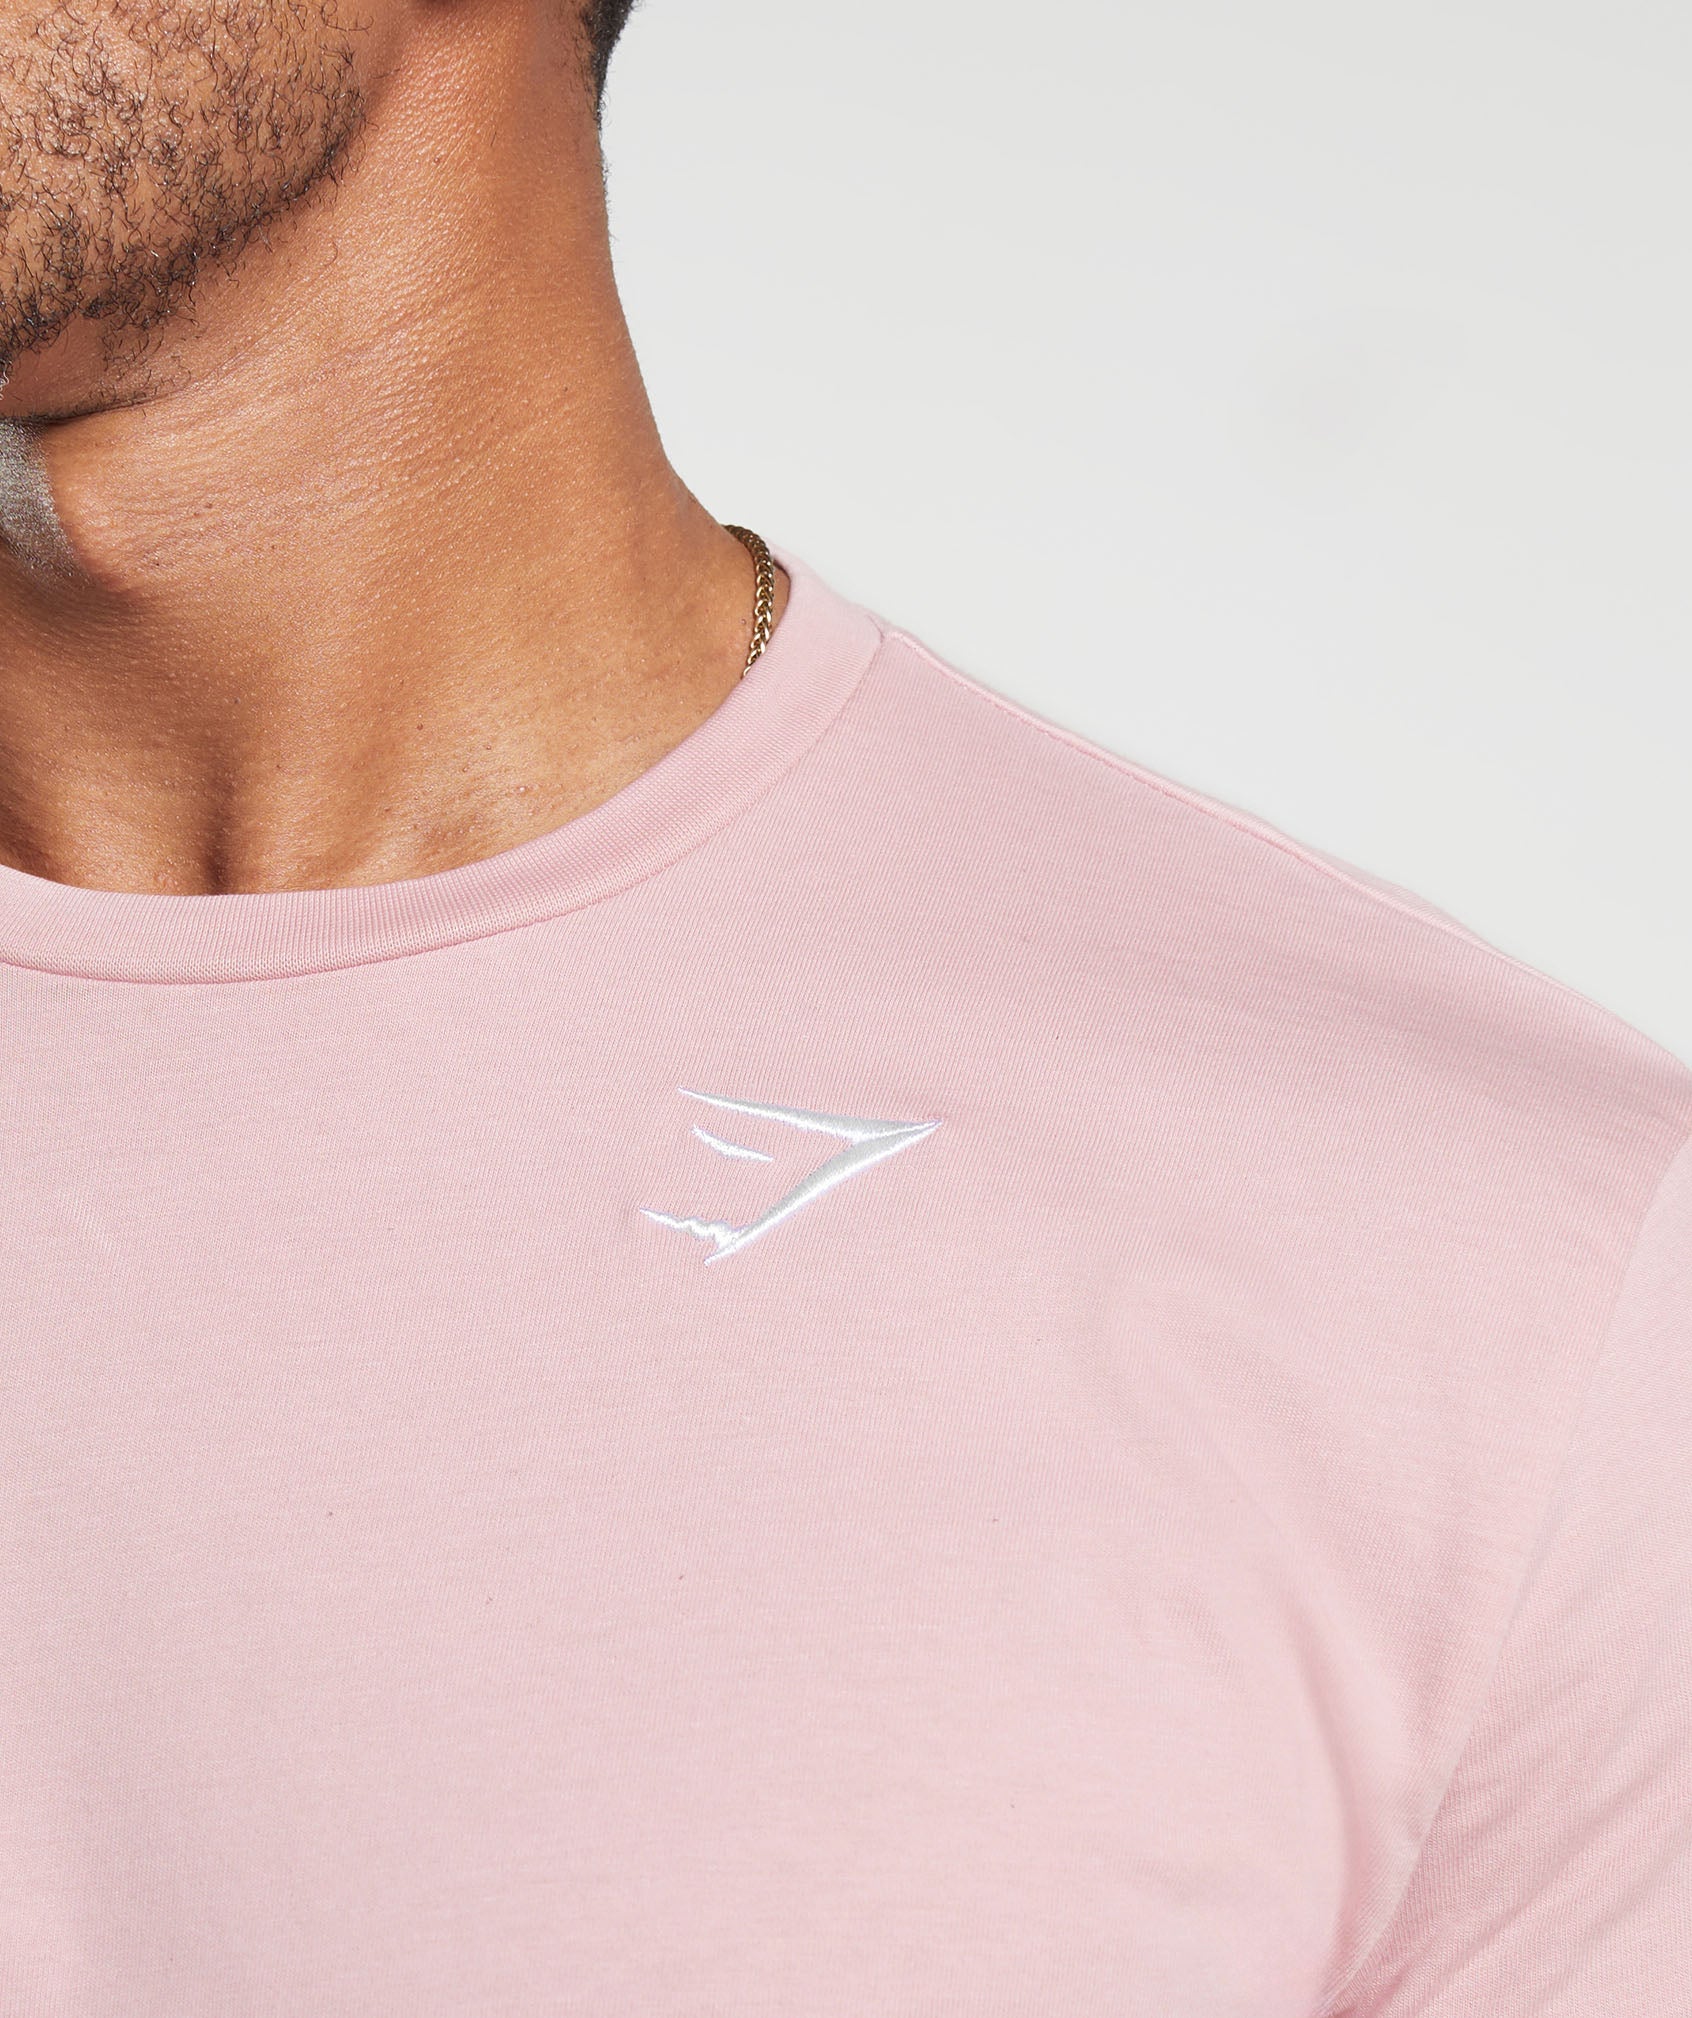 Crest T-Shirt in Light Pink - view 5